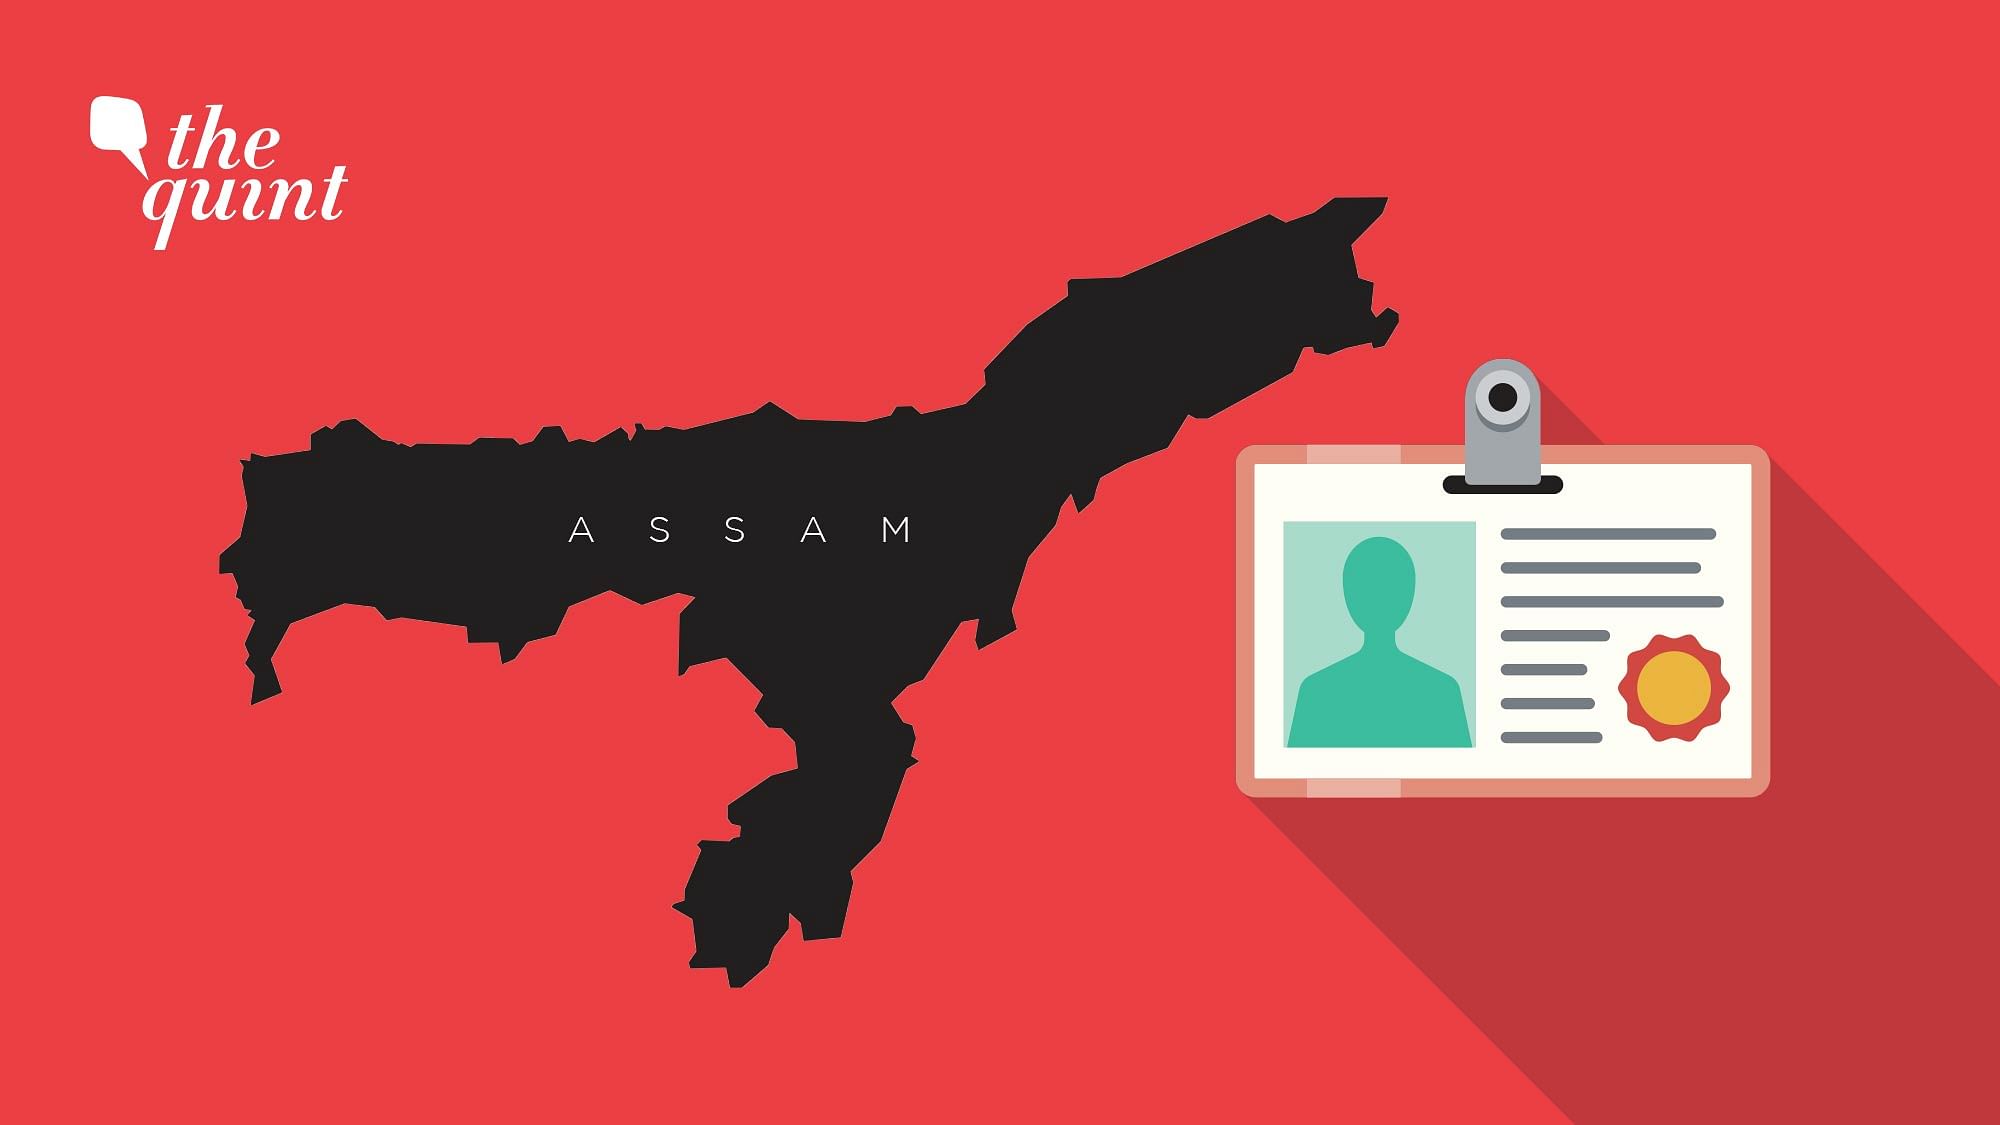 <div class="paragraphs"><p>A panel constituted by the BJP-led government in Assam proposed issuing ID cards for Assamese Muslims, in addition to conducting a census to “identify and document” the "indigenous" Assamese Muslim community.</p></div>